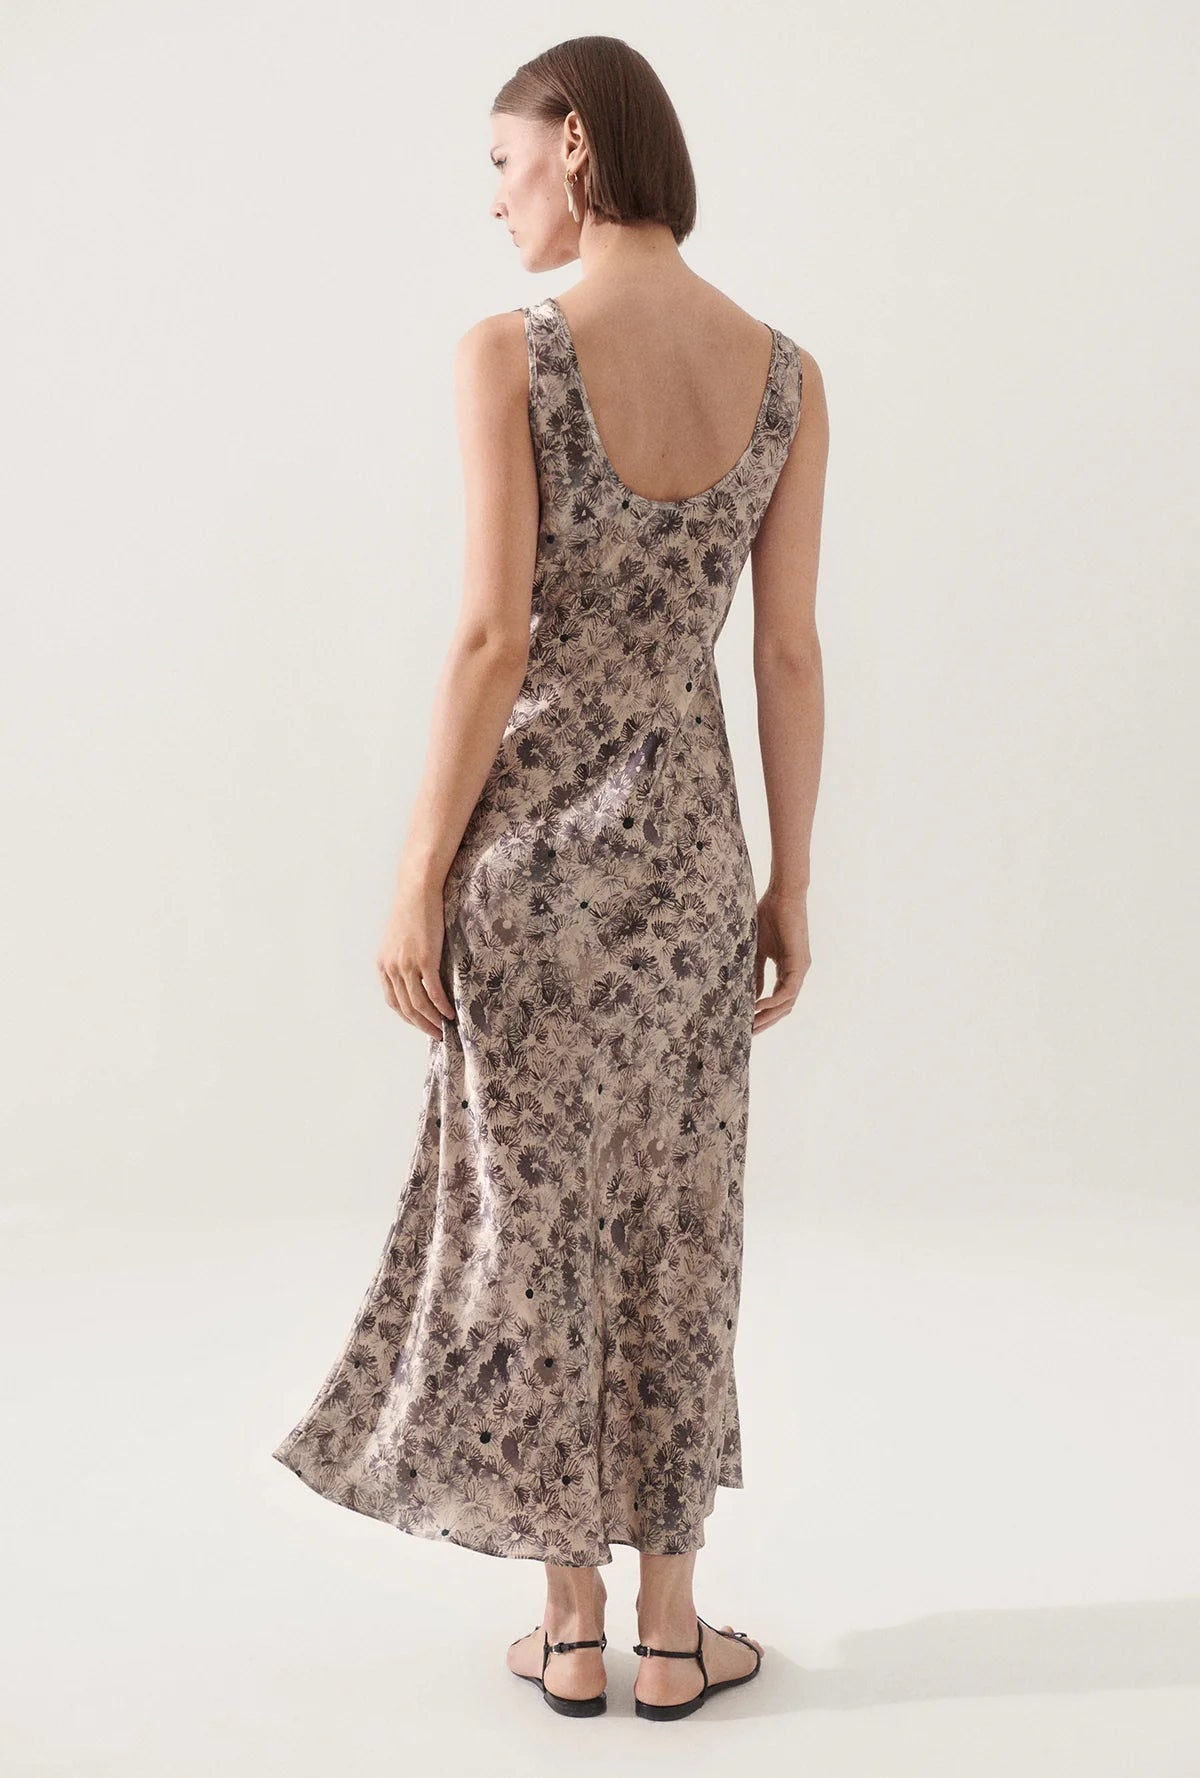 SCOOP NECK DRESS  - ASTER FLORAL - SILK LAUNDRY